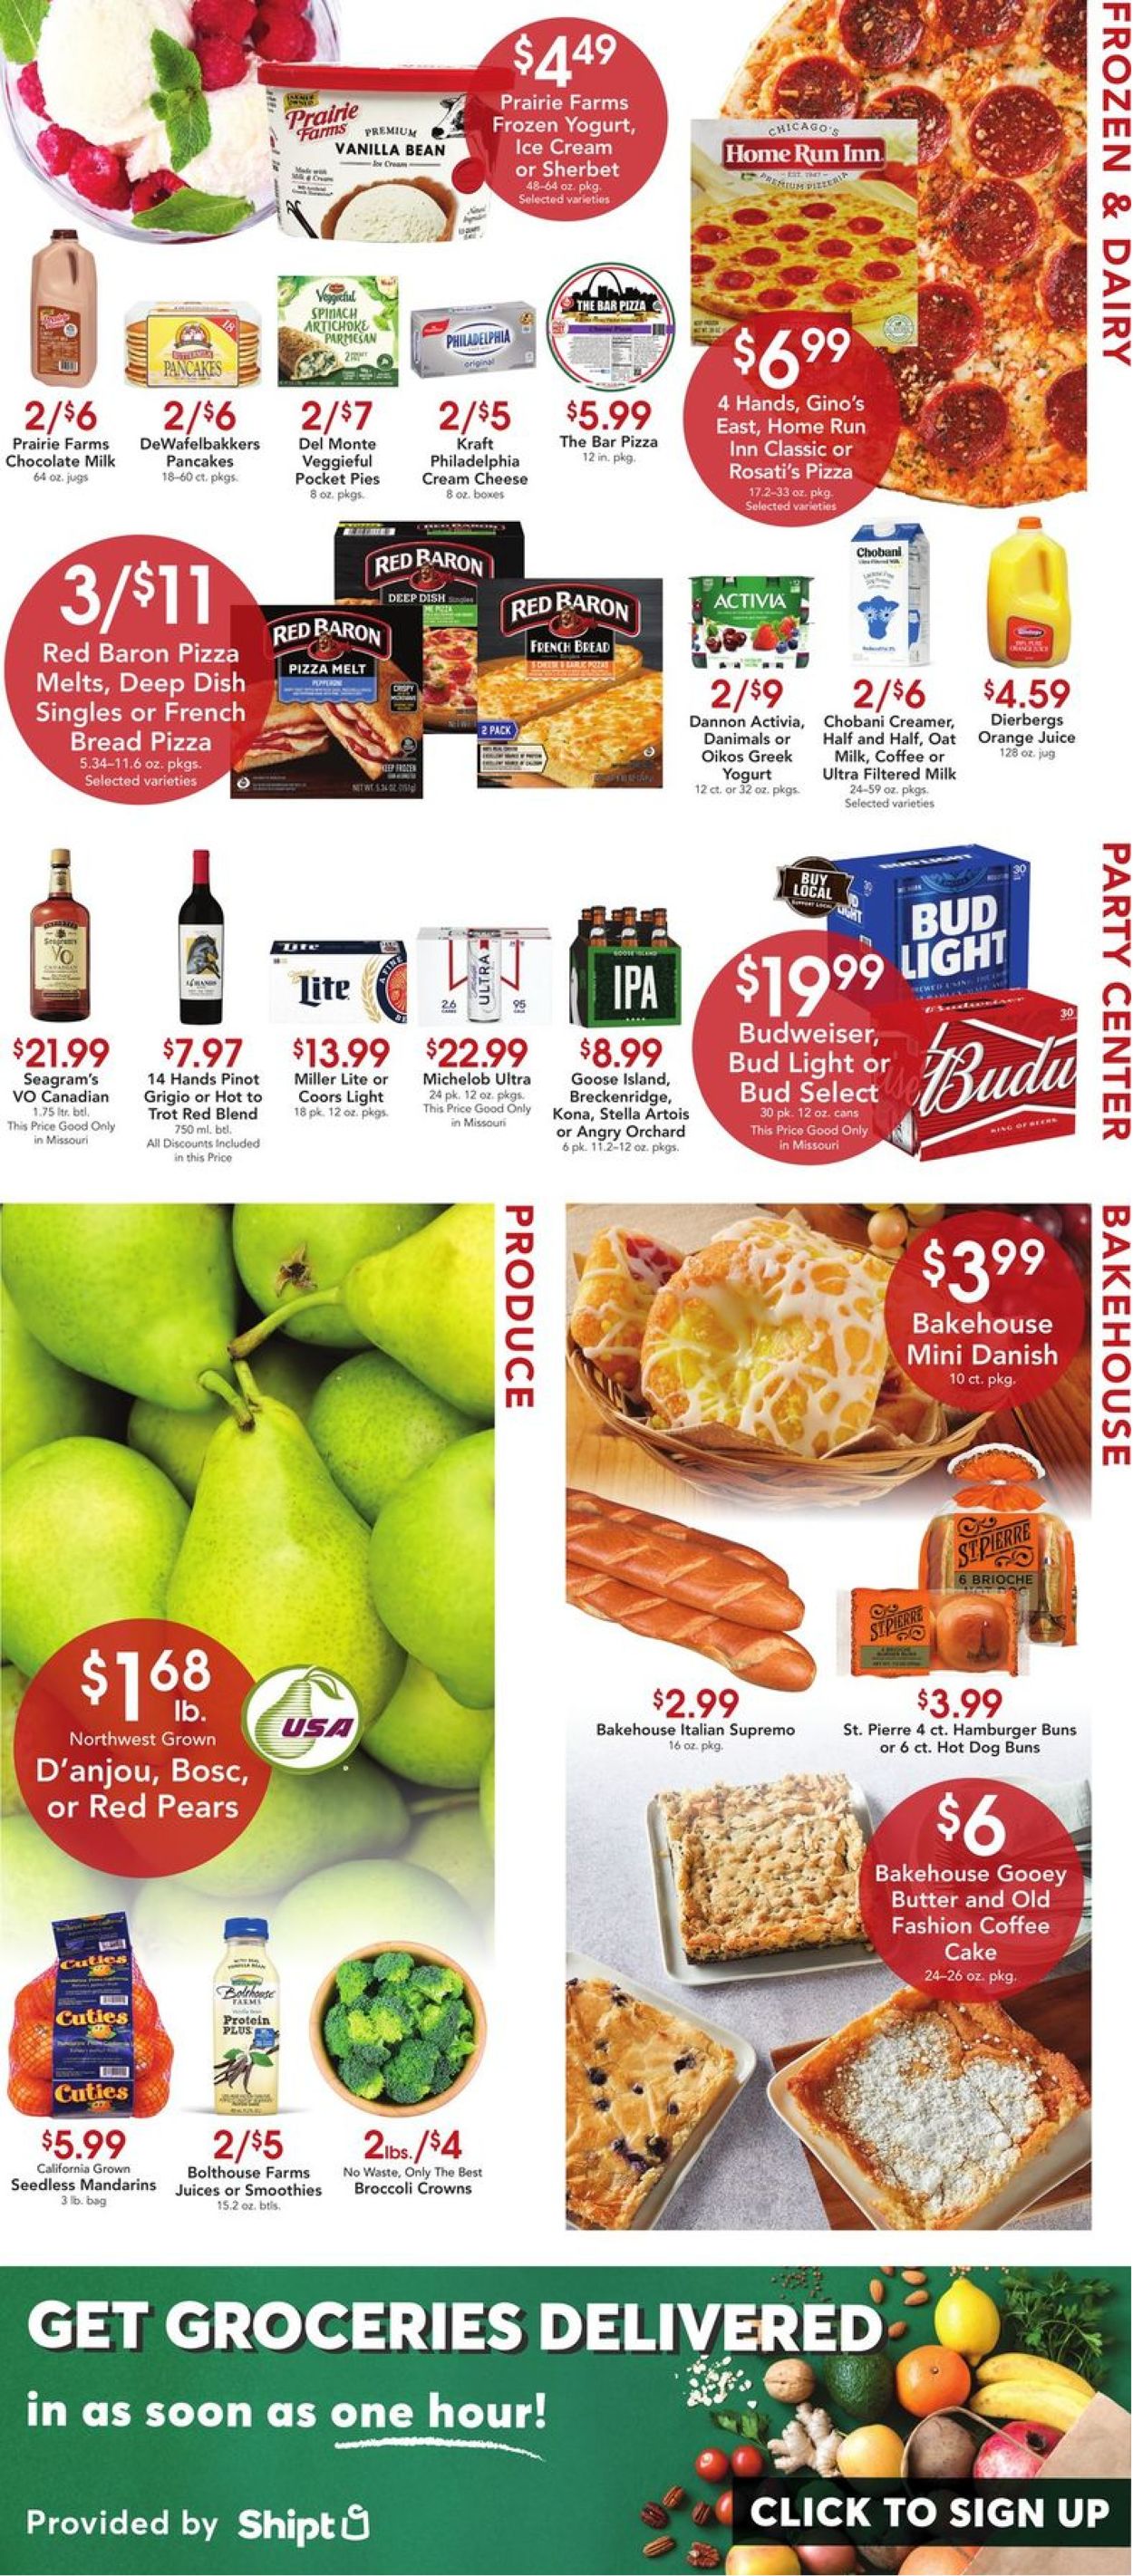 Dierbergs Ad from 03/01/2022